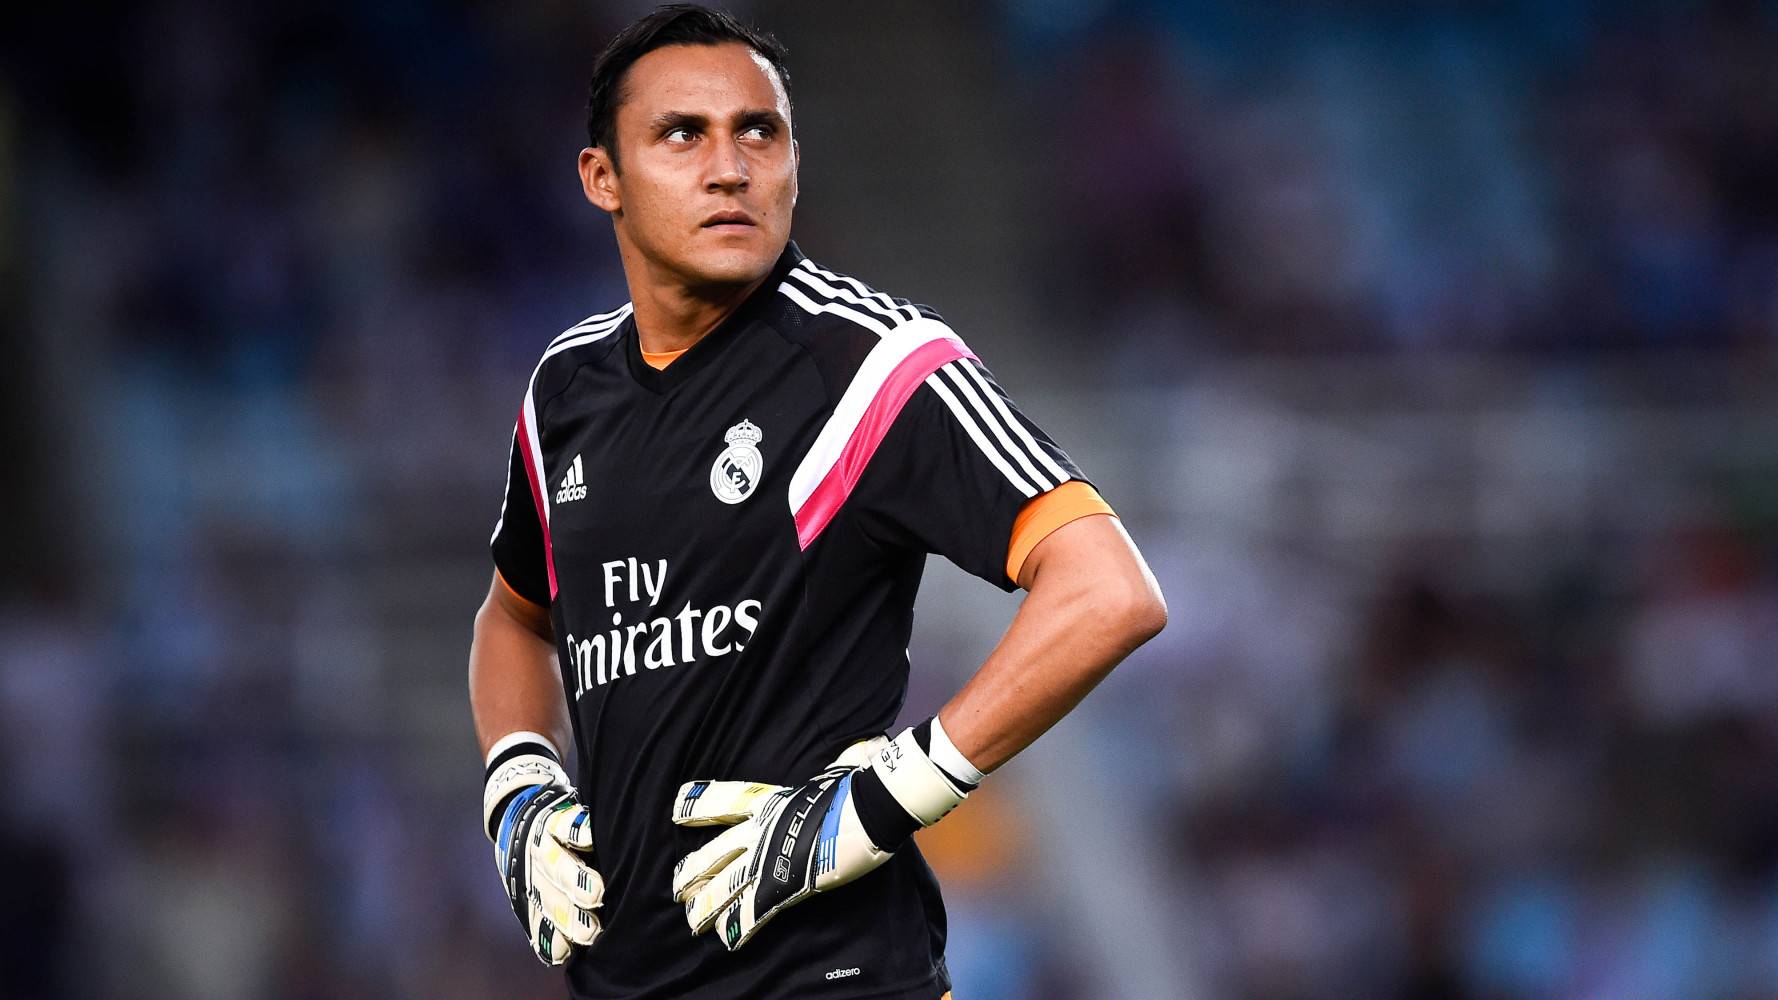 Keylor Navas, in an image of archive